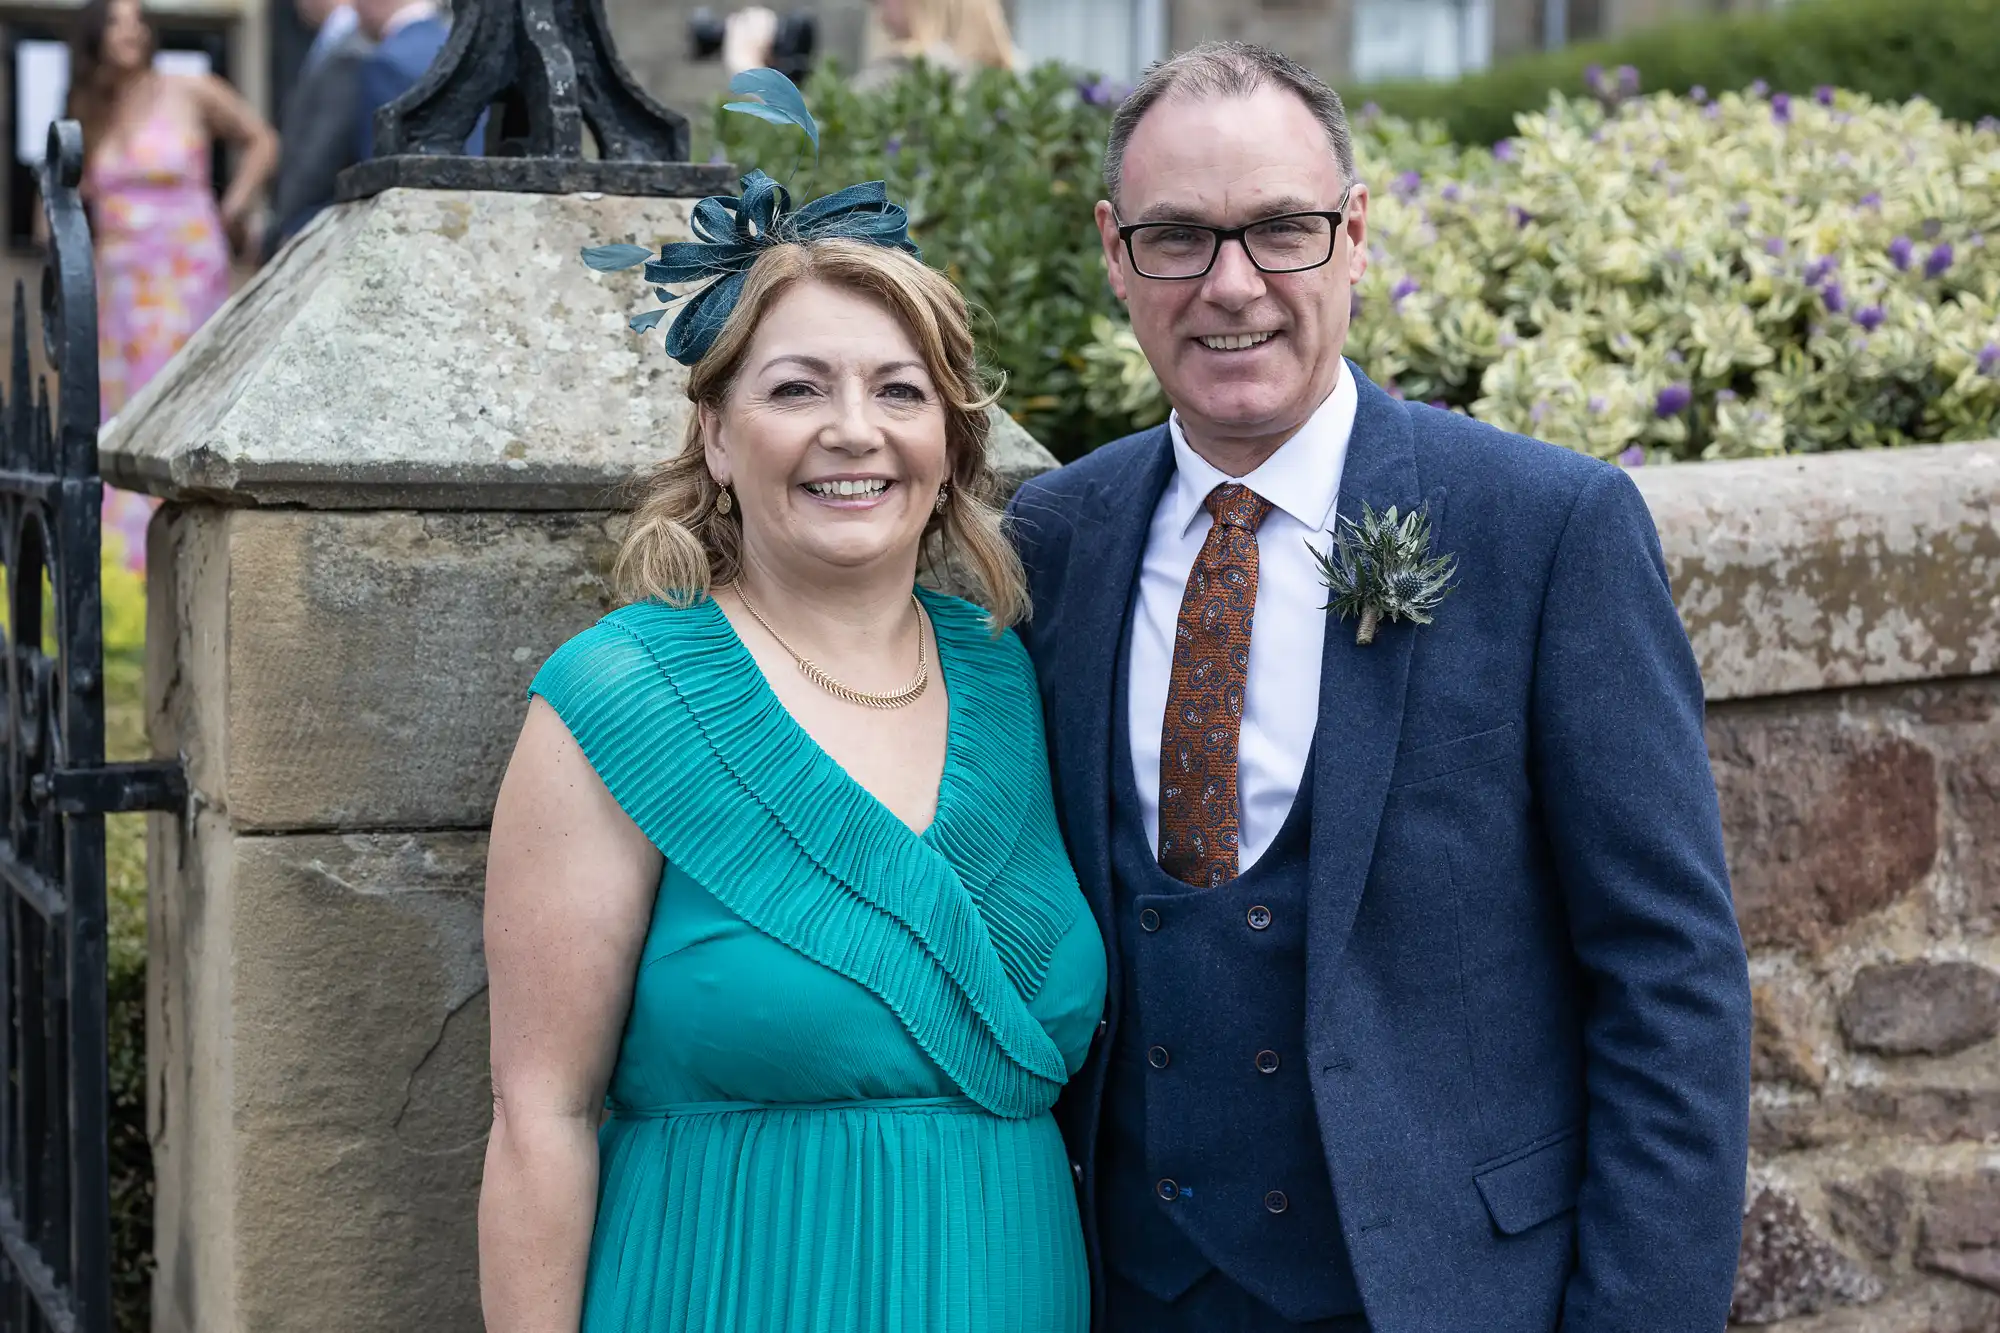 A smiling couple posing in formal attire at an outdoor event, the woman in a teal dress and fascinator, the man in a navy suit and patterned tie.